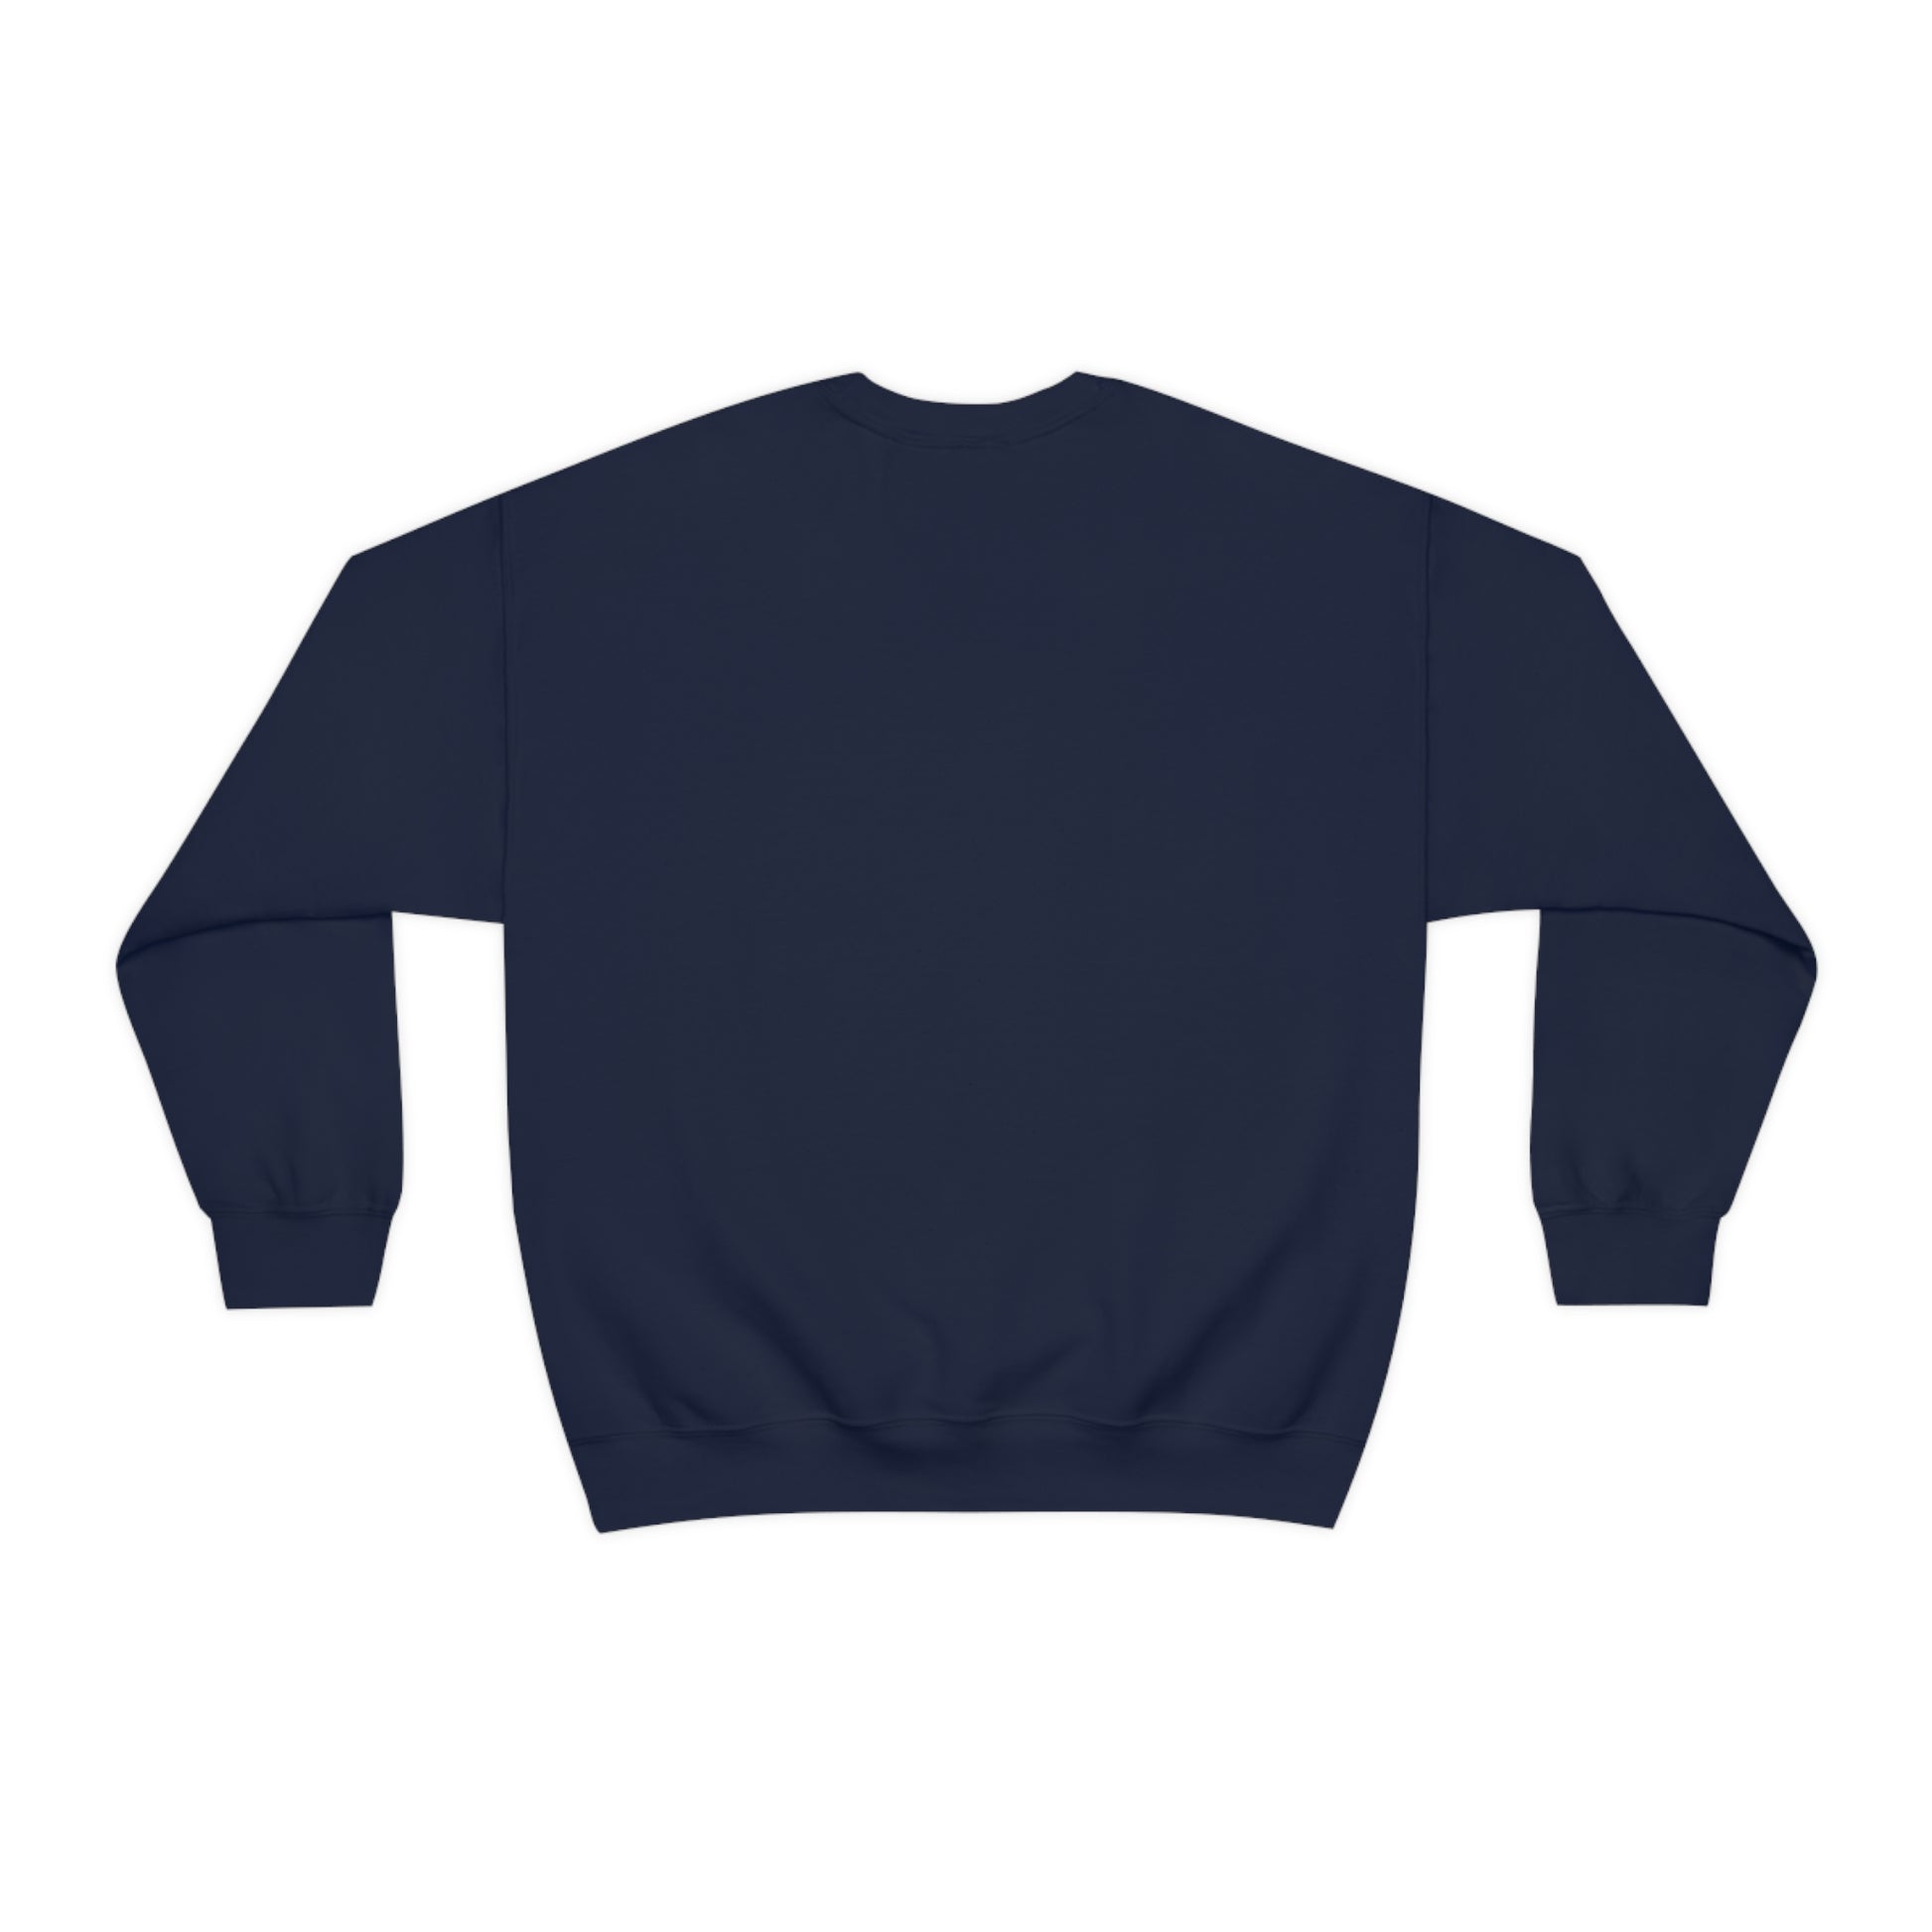 Flat back view of the Navy blue shirt